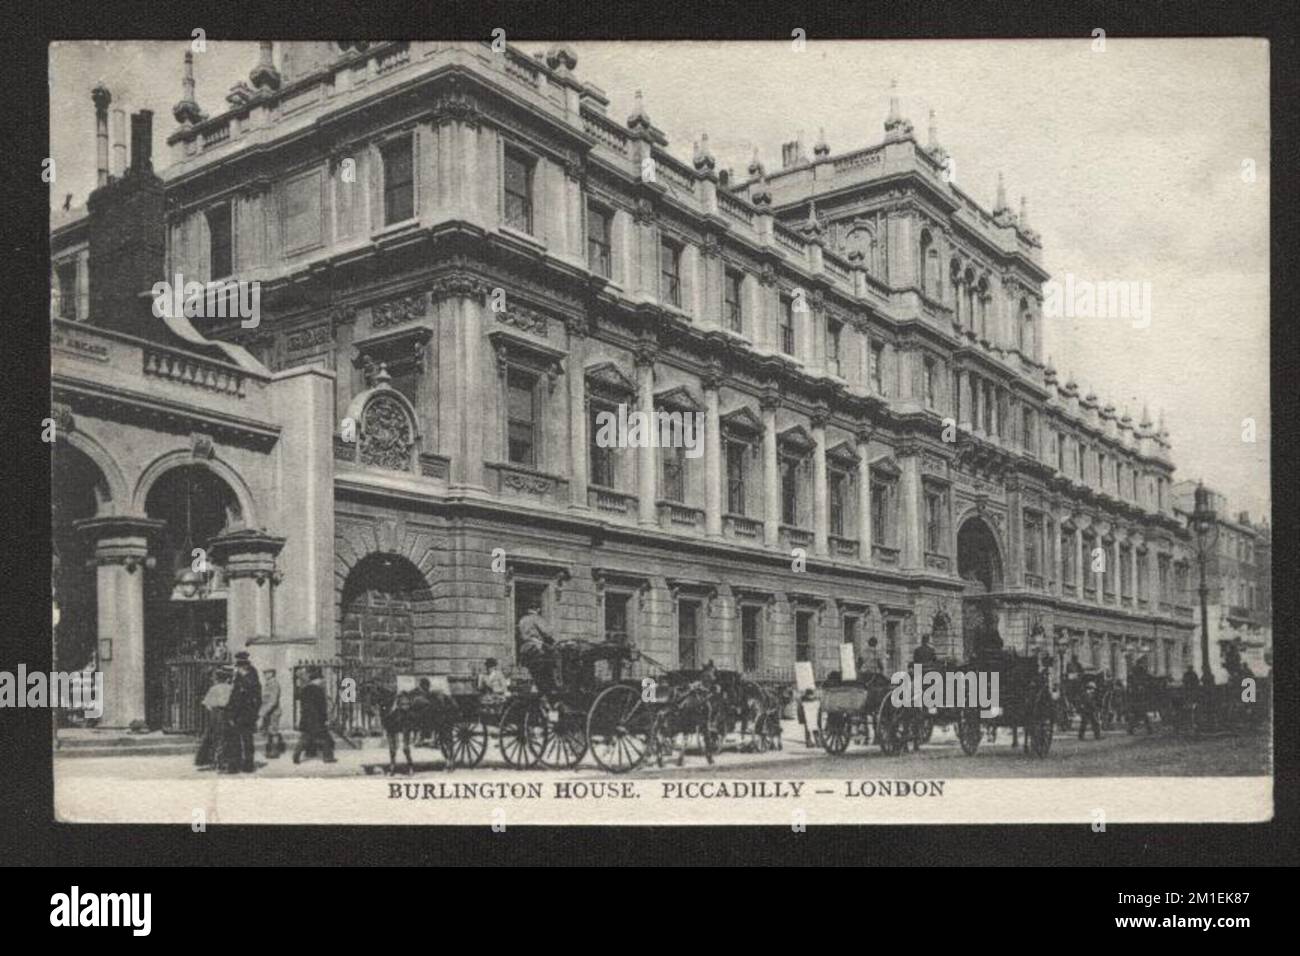 Antique Postcard of Burlington House in Piccaddily London United Kingdom UK with horse drawn Carriages and passers by. Snapshot of Victorian London. Stock Photo